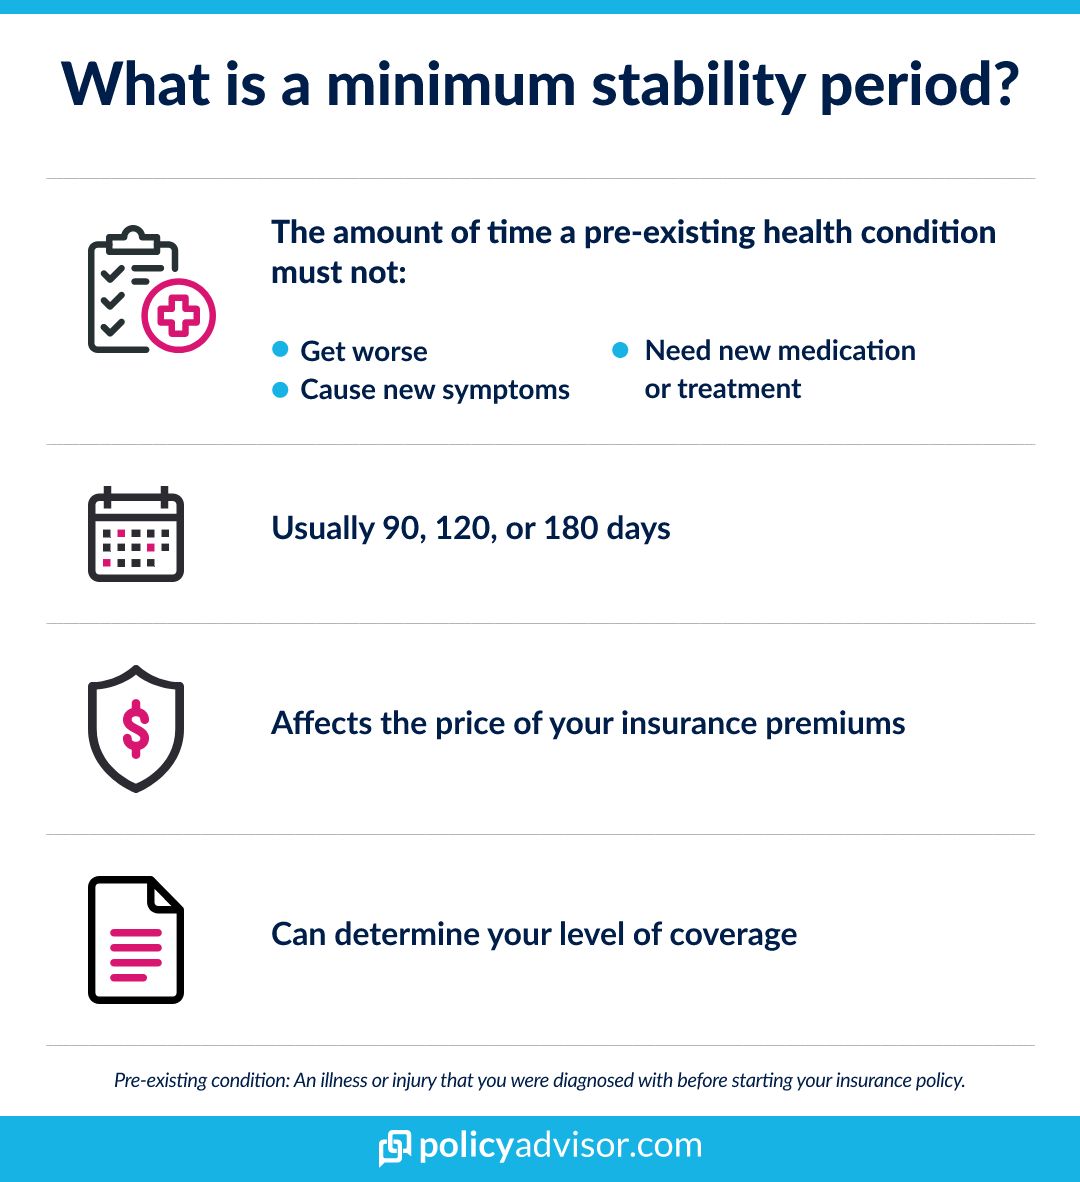 Travel insurance can depend on the traveler meeting a minimum stability period for pre-existing conditions.